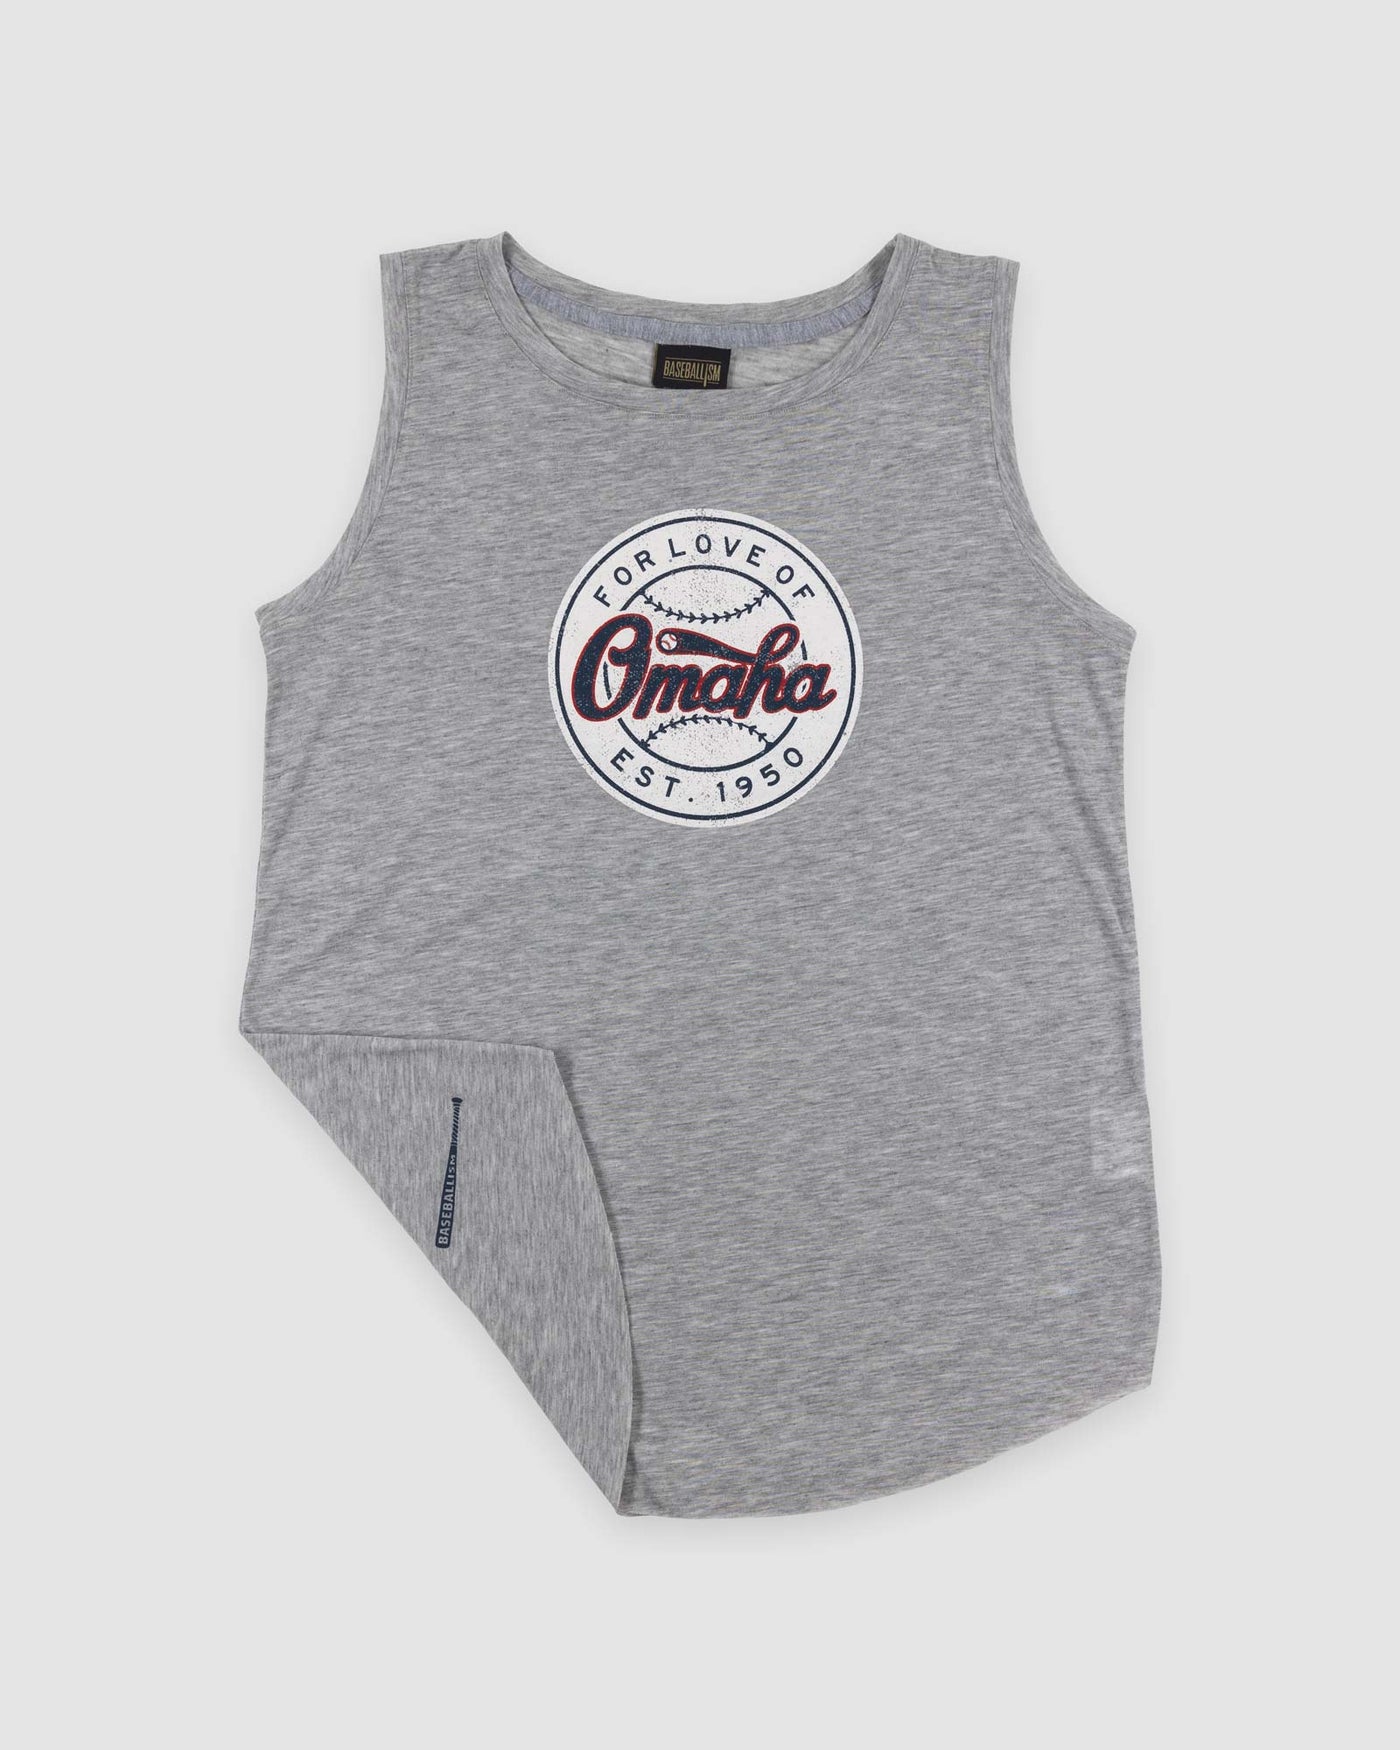 For Love of Omaha Tank